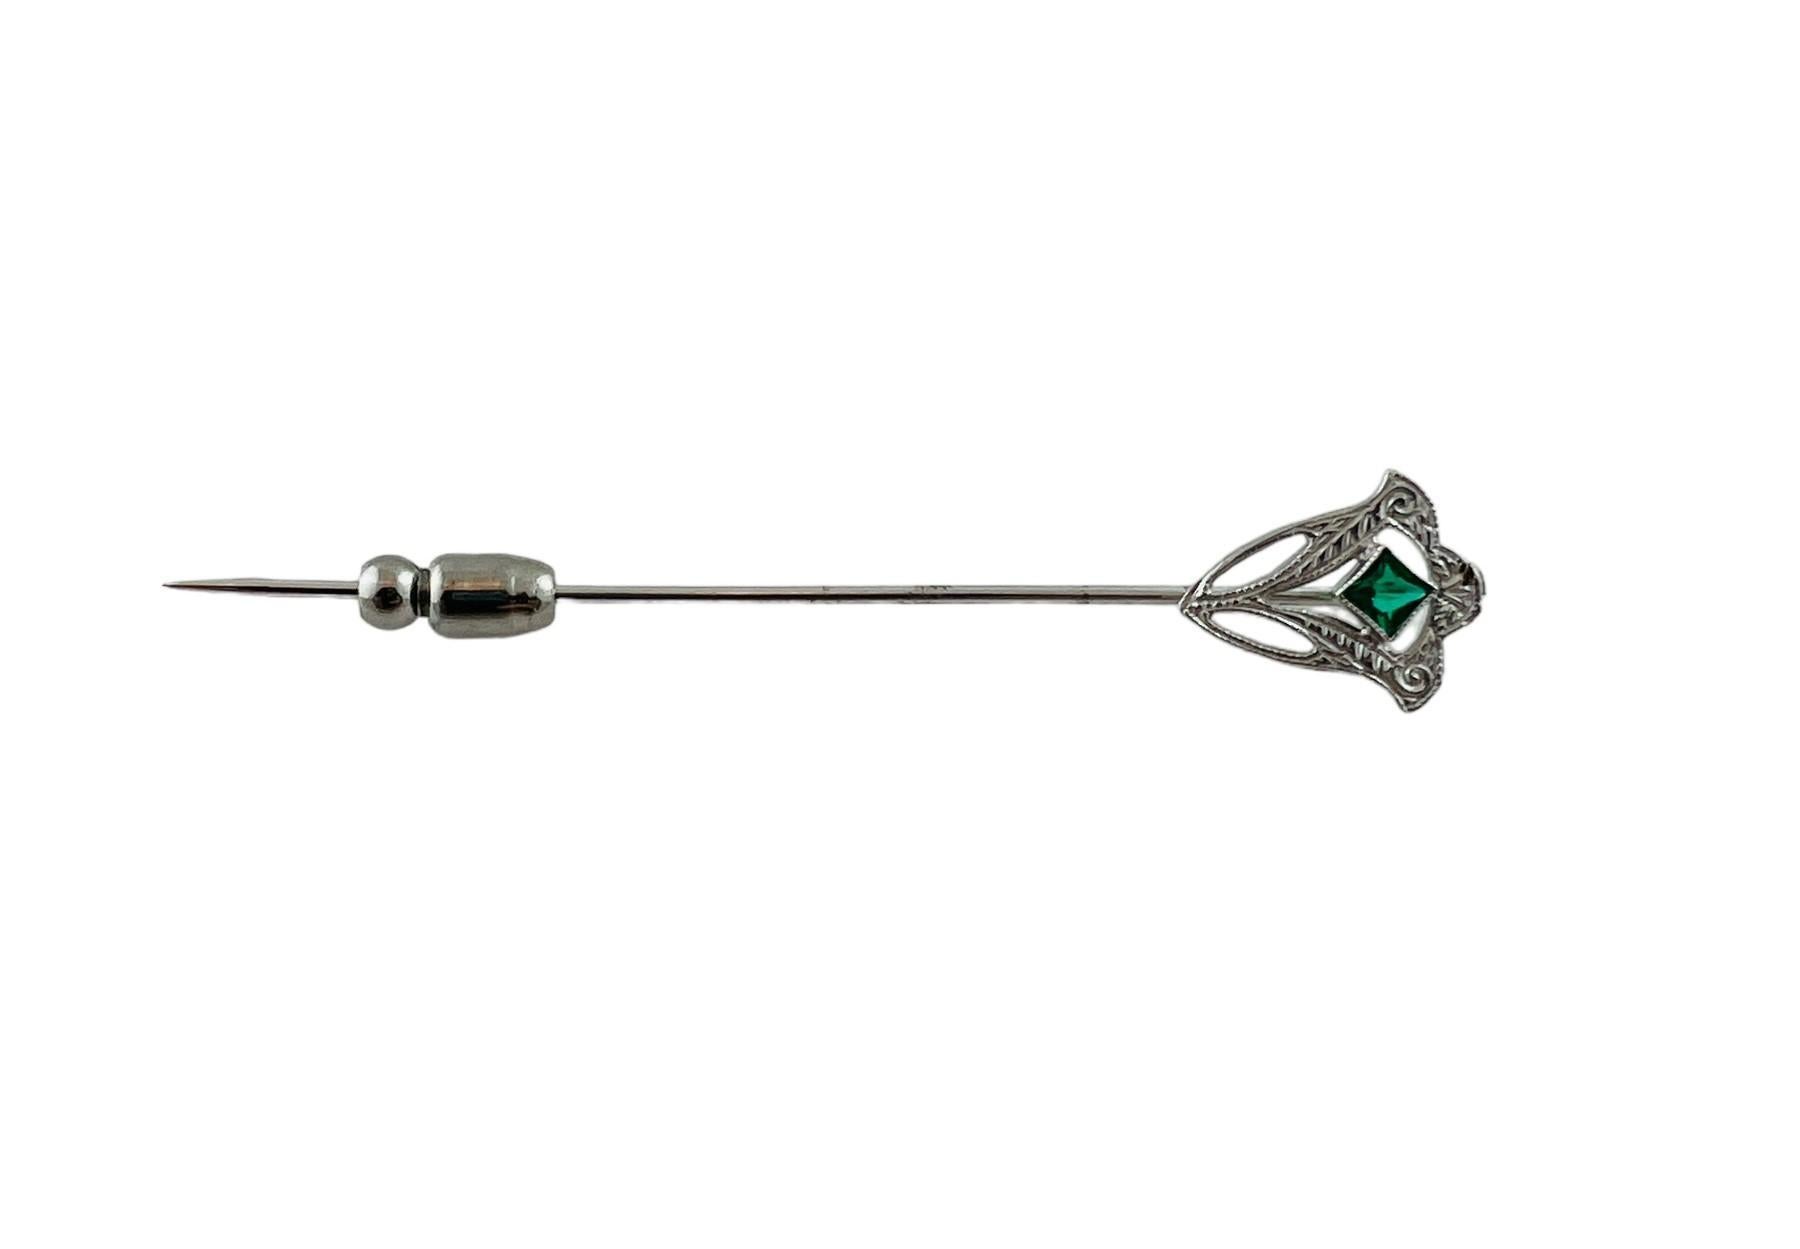 10K White Gold Stick Pin with Green Glass Stone #15688 In Good Condition For Sale In Washington Depot, CT